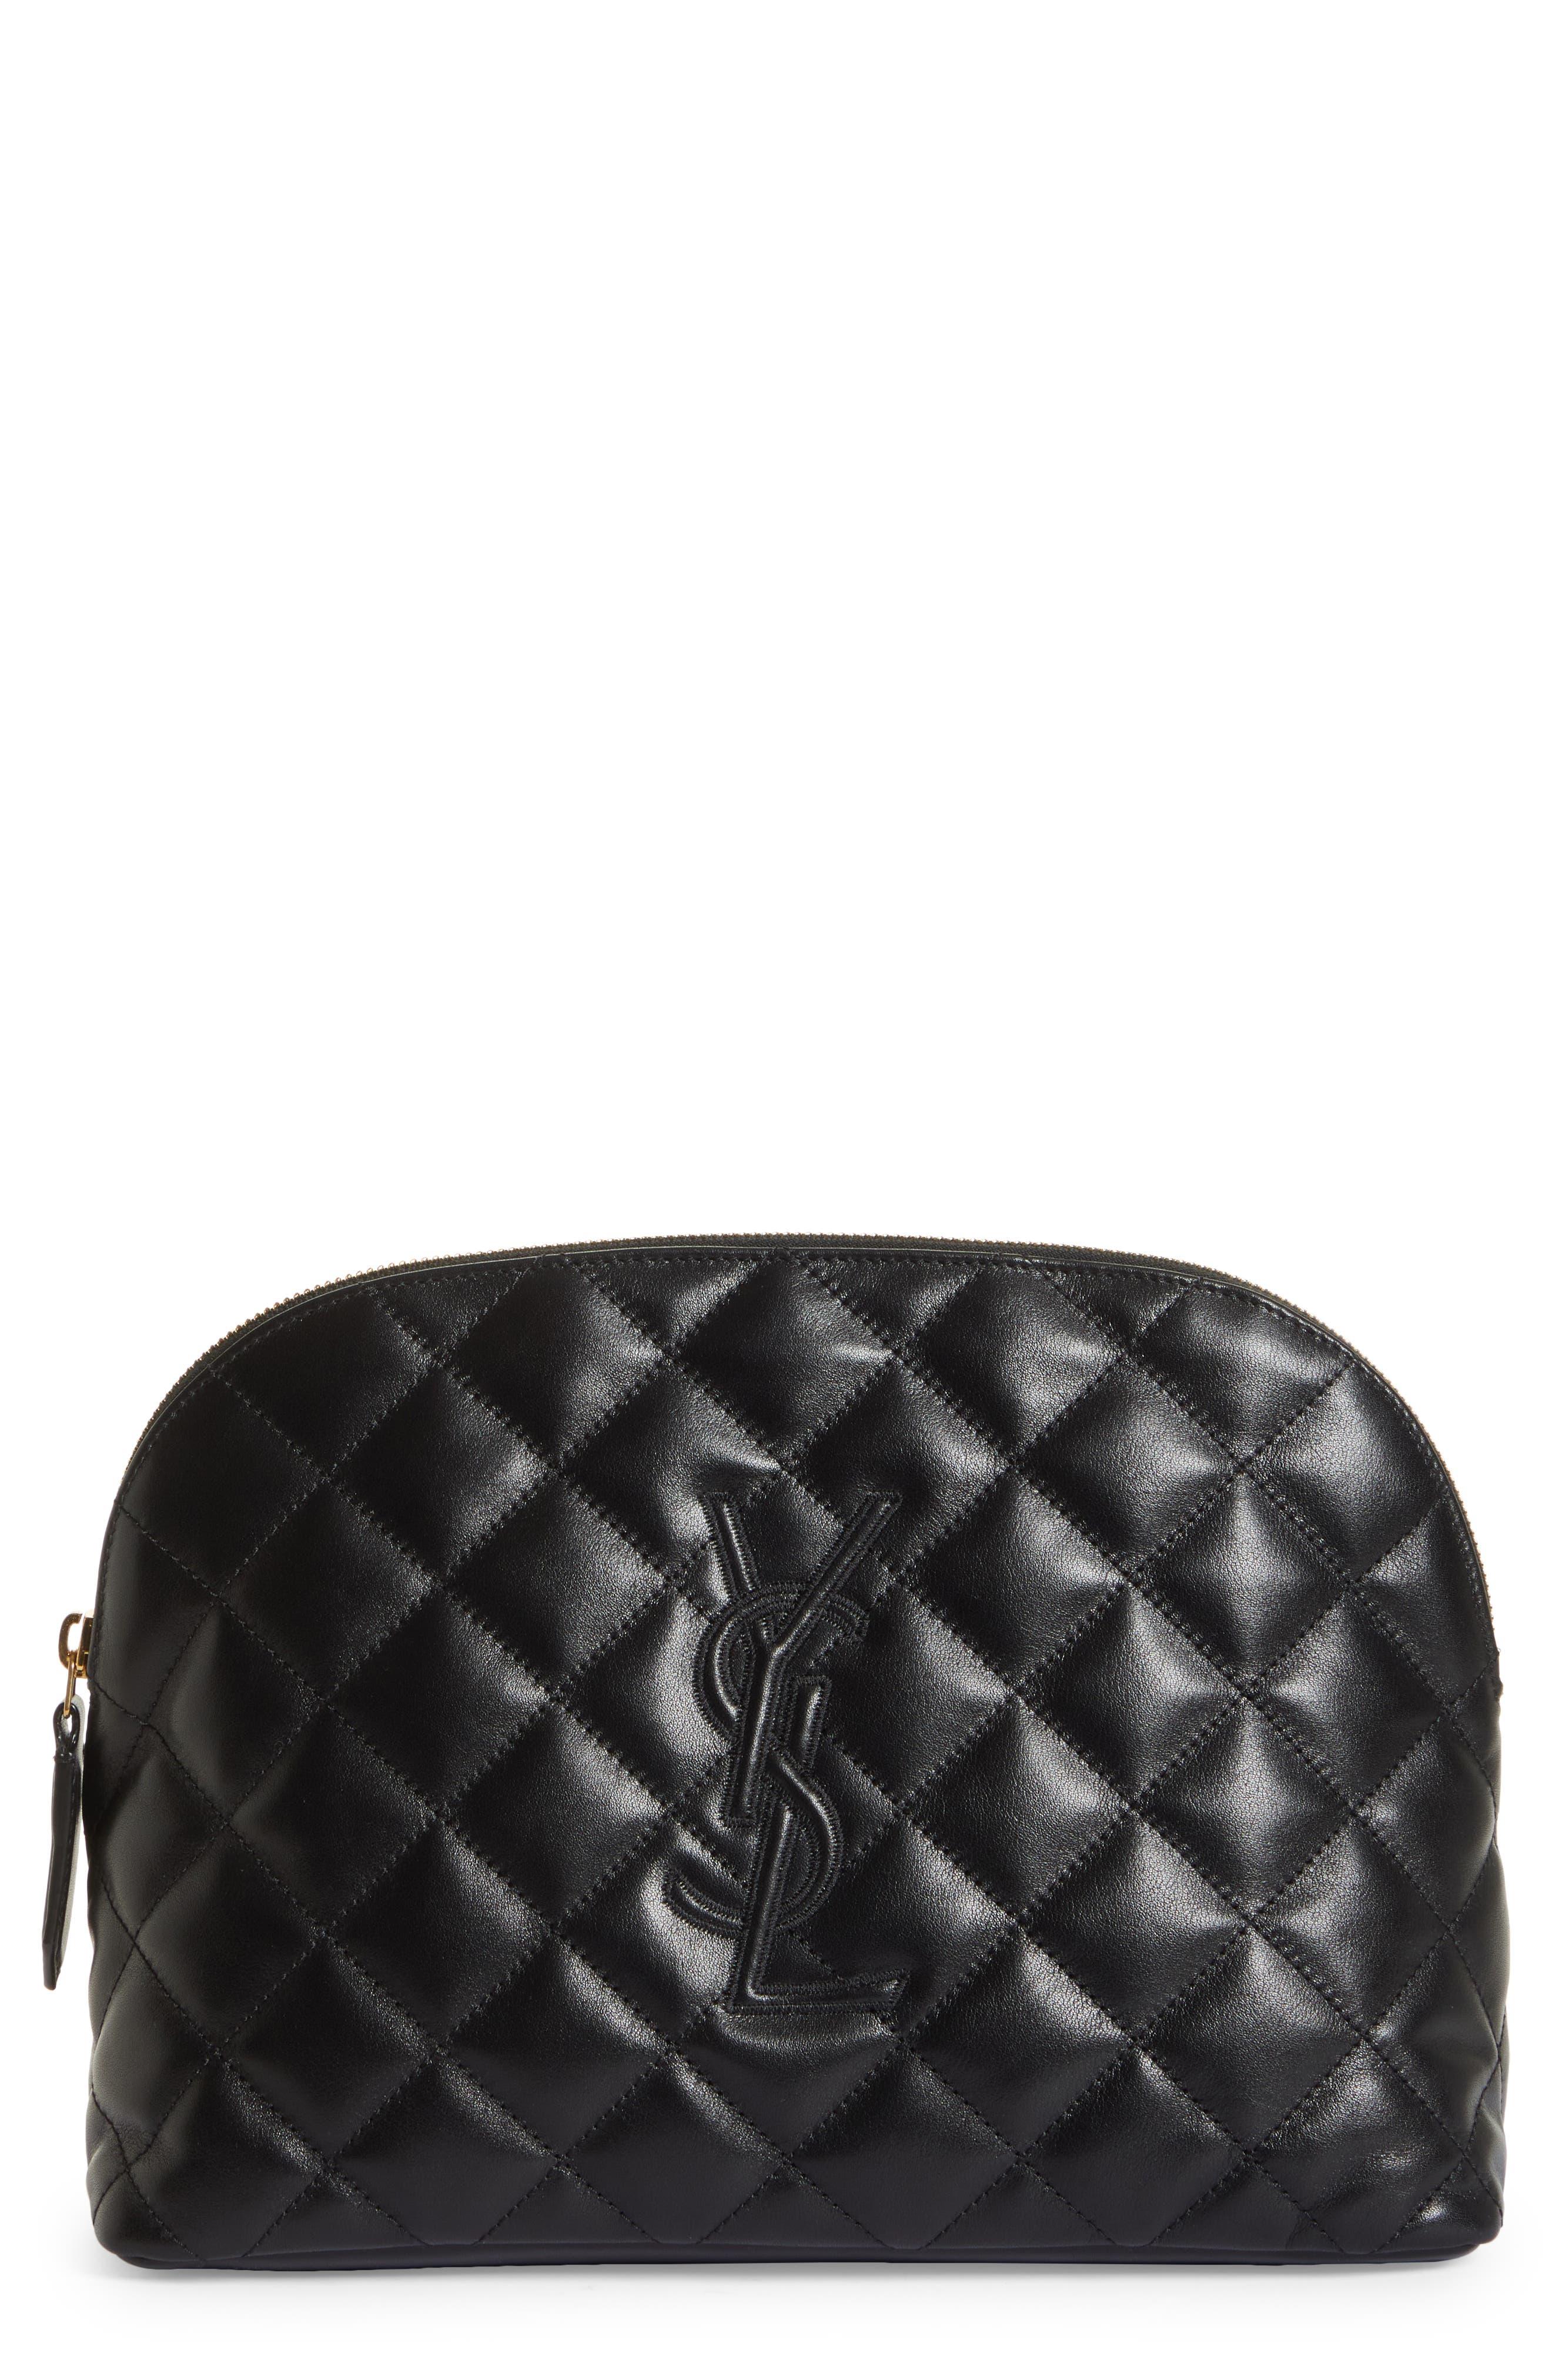 Saint Laurent YSL Quilted Leather Monogram Clutch Wristlet Pouch NWT